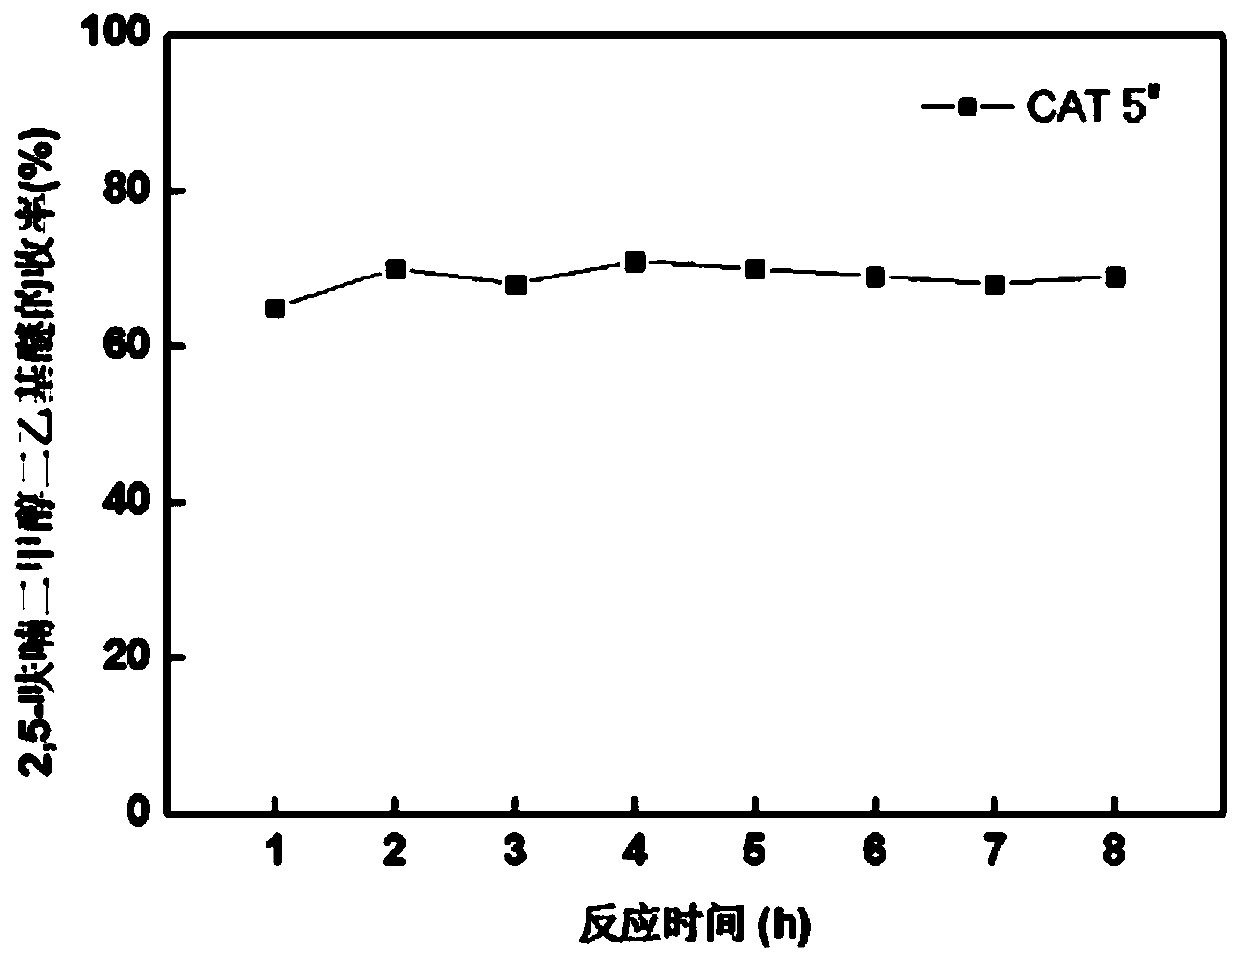 Bifunctional catalyst, preparation and application of bifunctional catalyst in one-step synthesis of 2, 5-furan dialkyl ether from 5-hydroxymethylfurfural